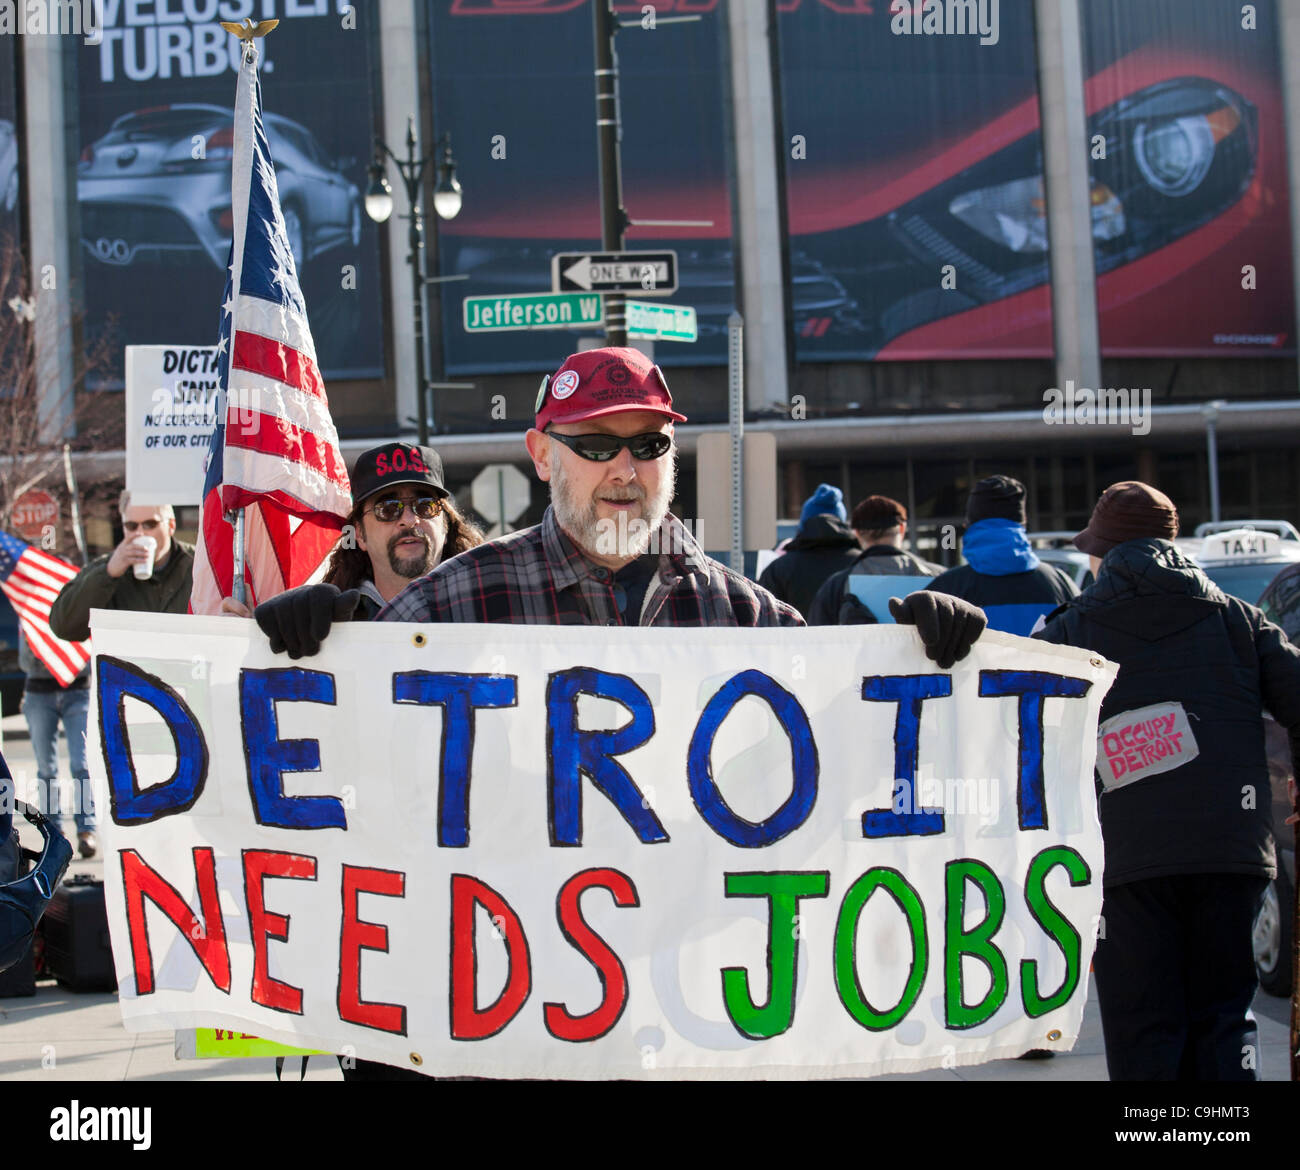 Detroit, Michigan - Auto workers rally outside the North American International Auto Show, protesting job losses, wage cuts, and other contract concessions. Stock Photo